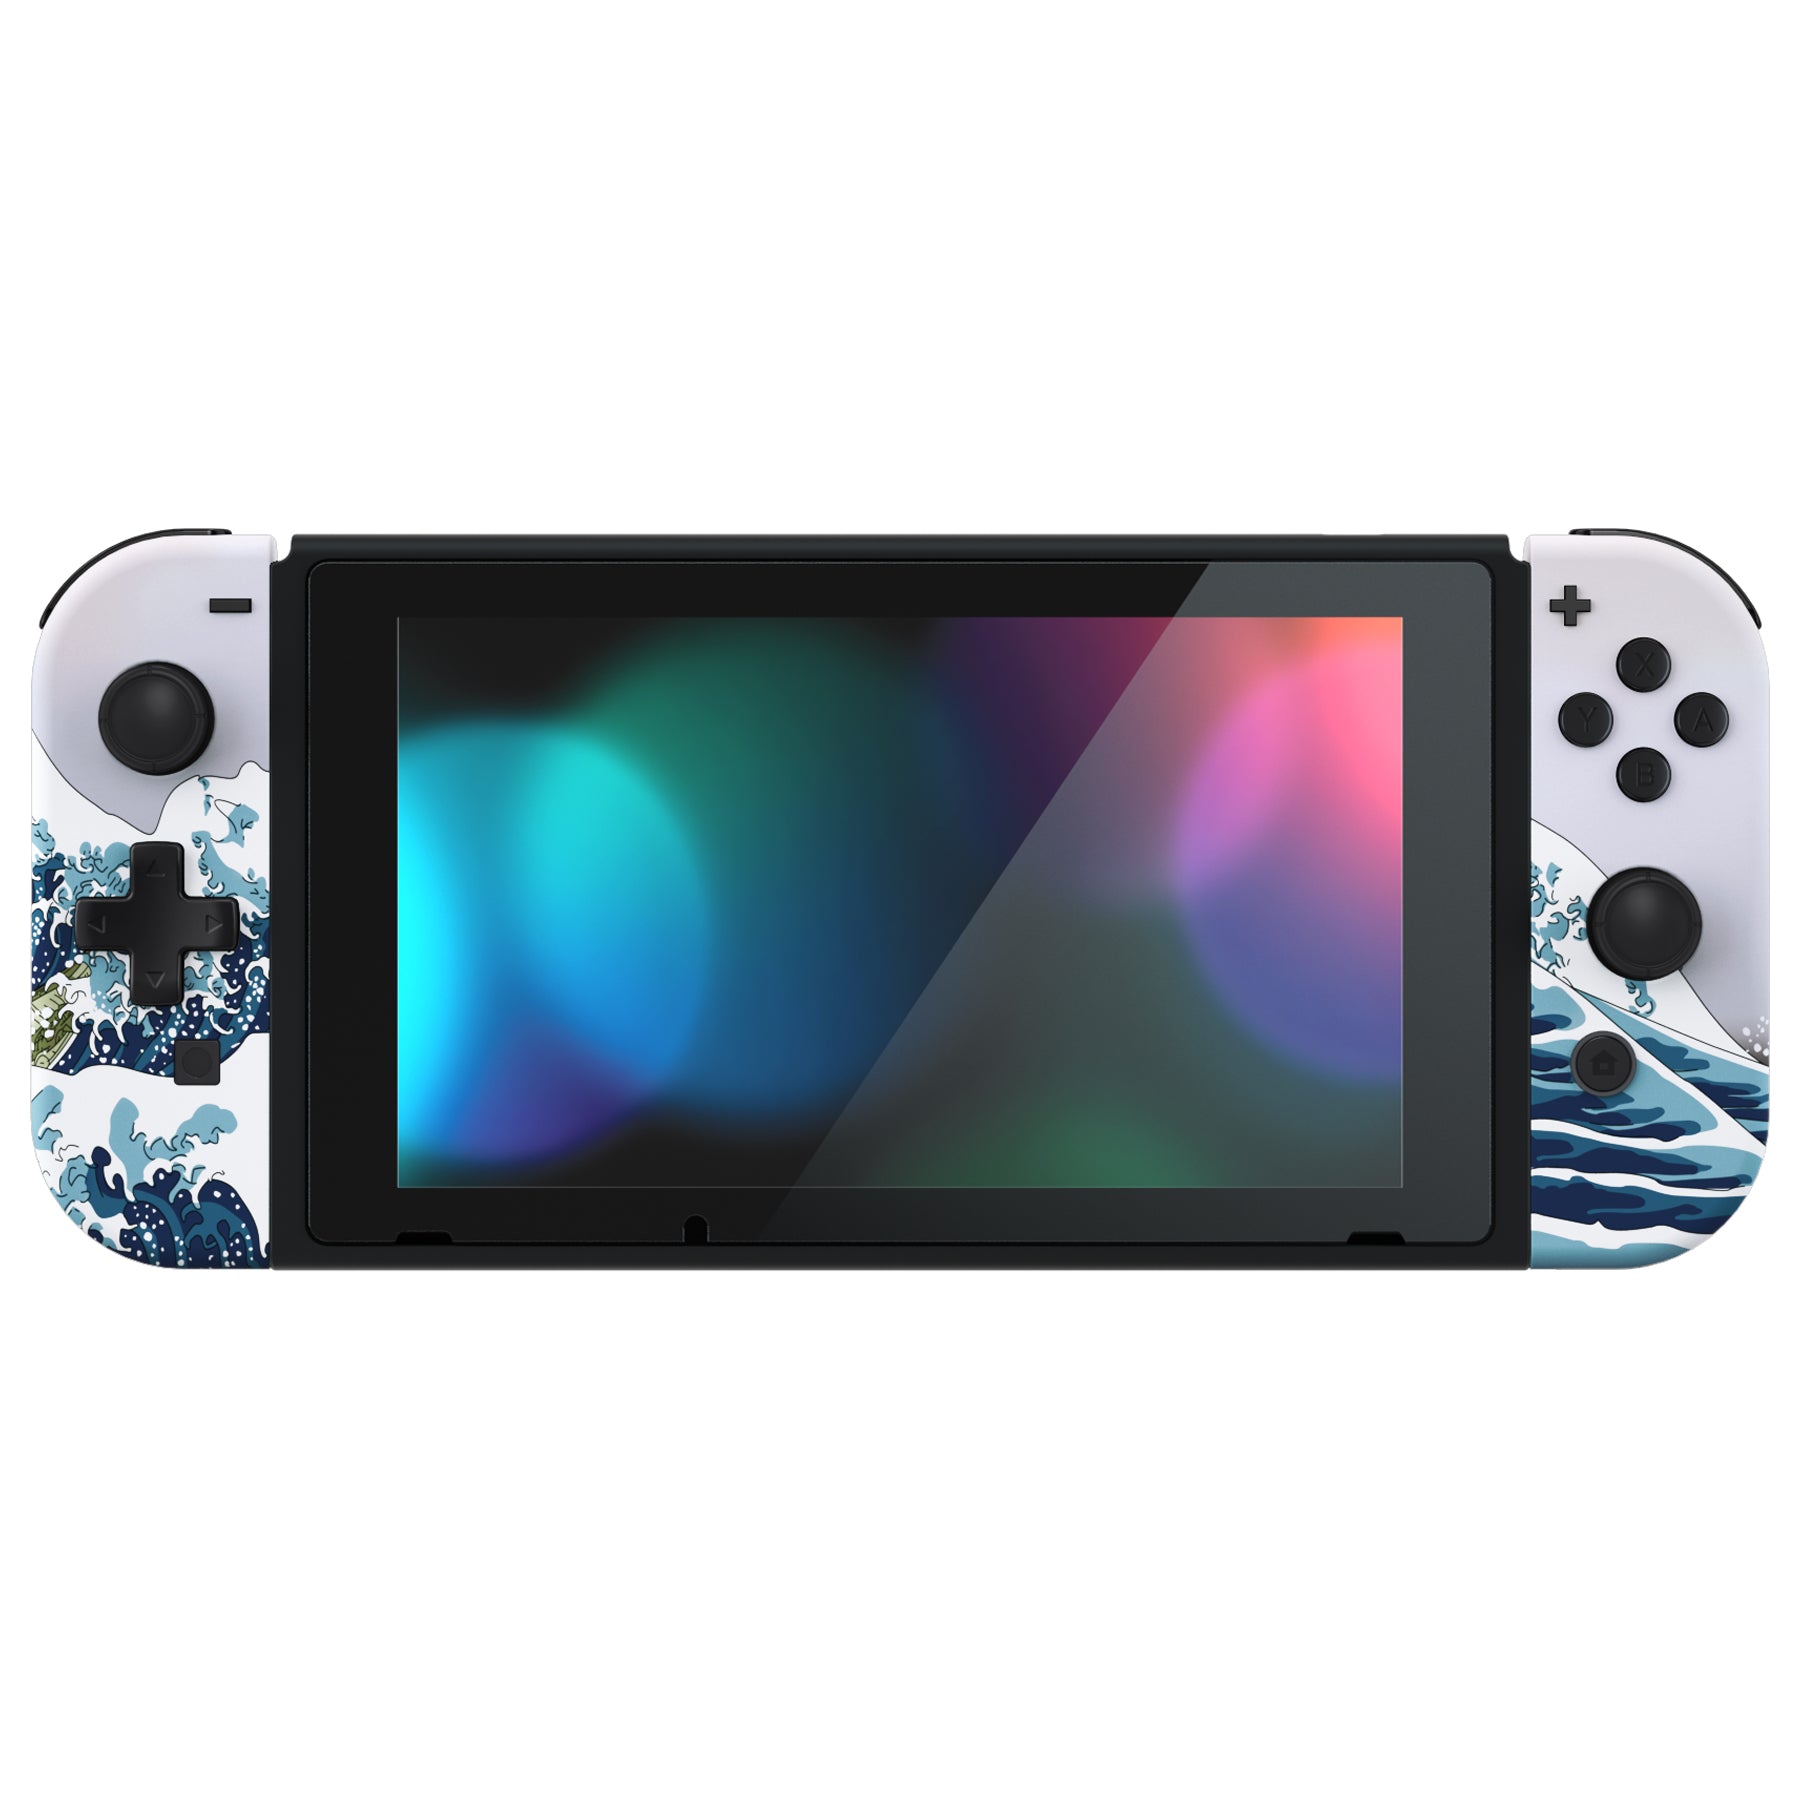 eXtremeRate Retail Products eXtremeRate Dpad Version Custom Full Set Shell for Nintendo Switch, Soft Touch Grip Replacement Console Back Plate, NS Joycon Handheld Controller Housing & Buttons for Nintendo Switch - The Great Wave - QZT1002